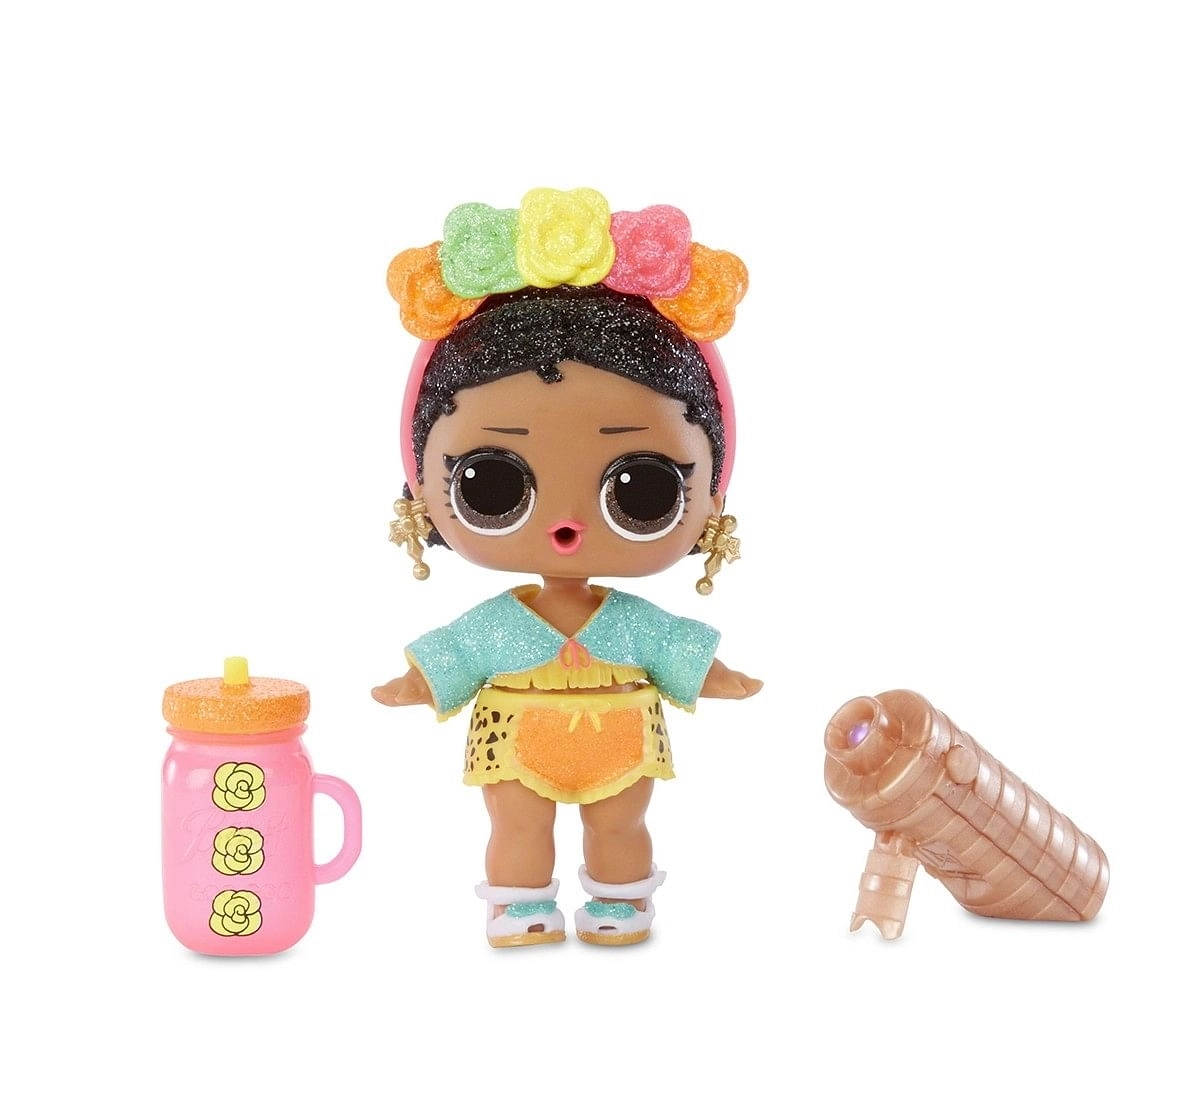 LOL Surprise Lights Glitter, Collectible Dolls for Girls age 3Y+ (Assorted)